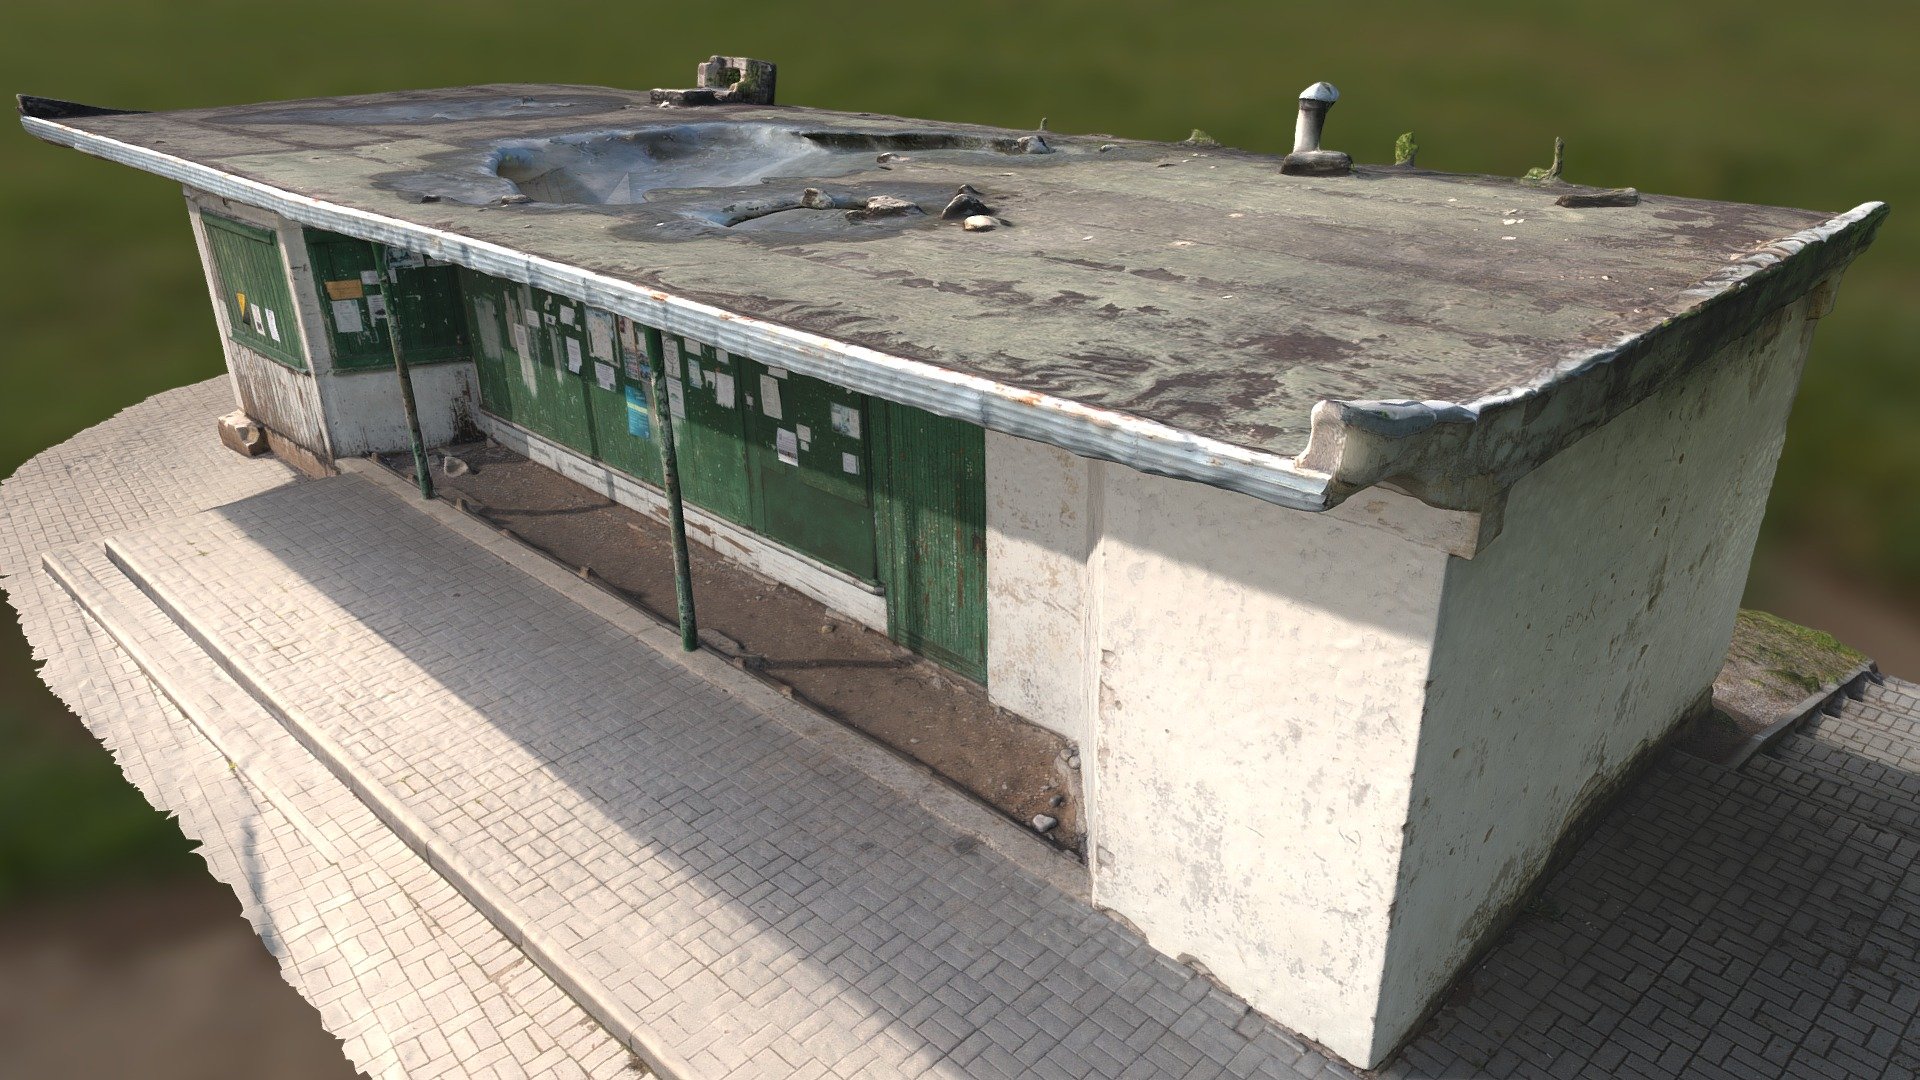 Old, derelict bus stop 3D scan.
Old doors with chipped paint.
Chipped paint on walls.
Grafitti on walls 3d model